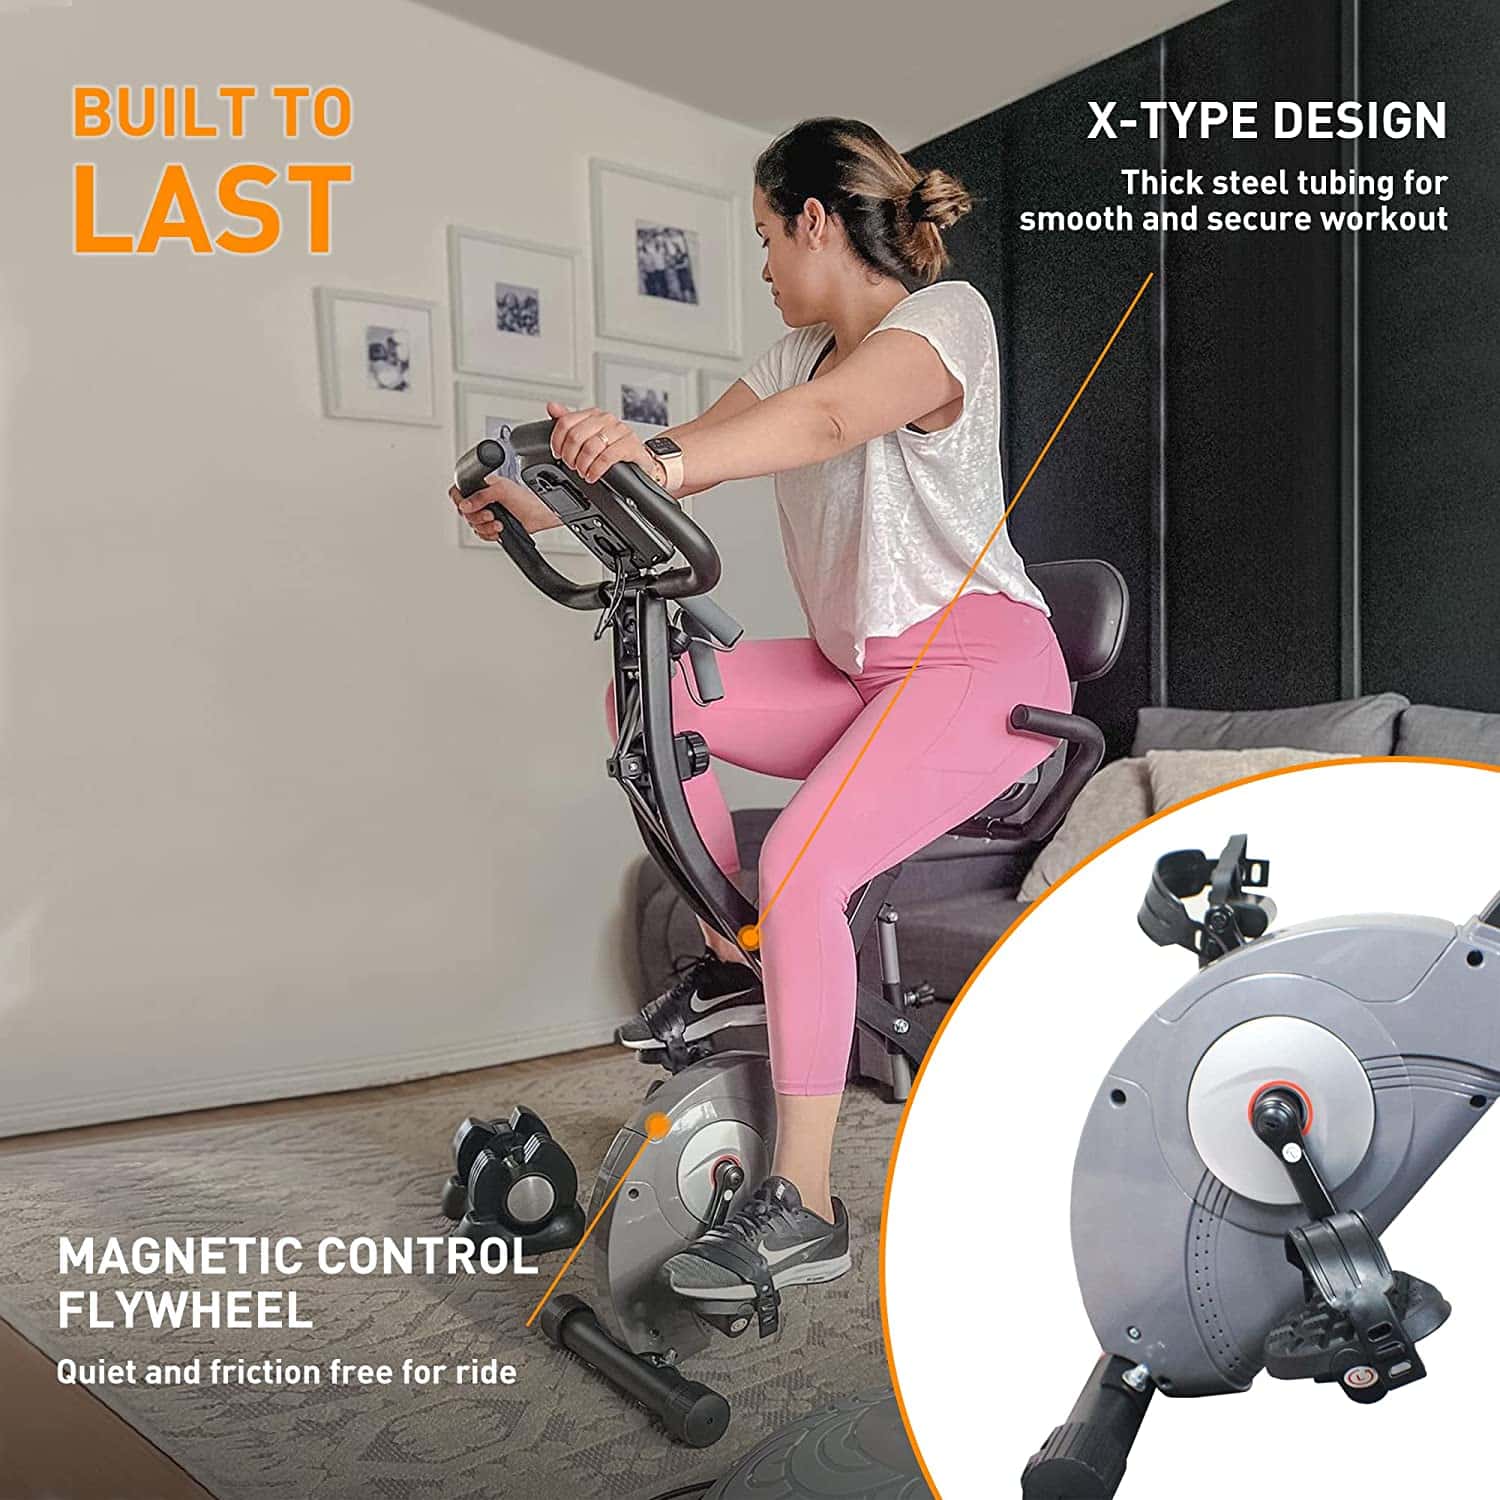 Ativafit Foldable Exercise Bike - with a female model